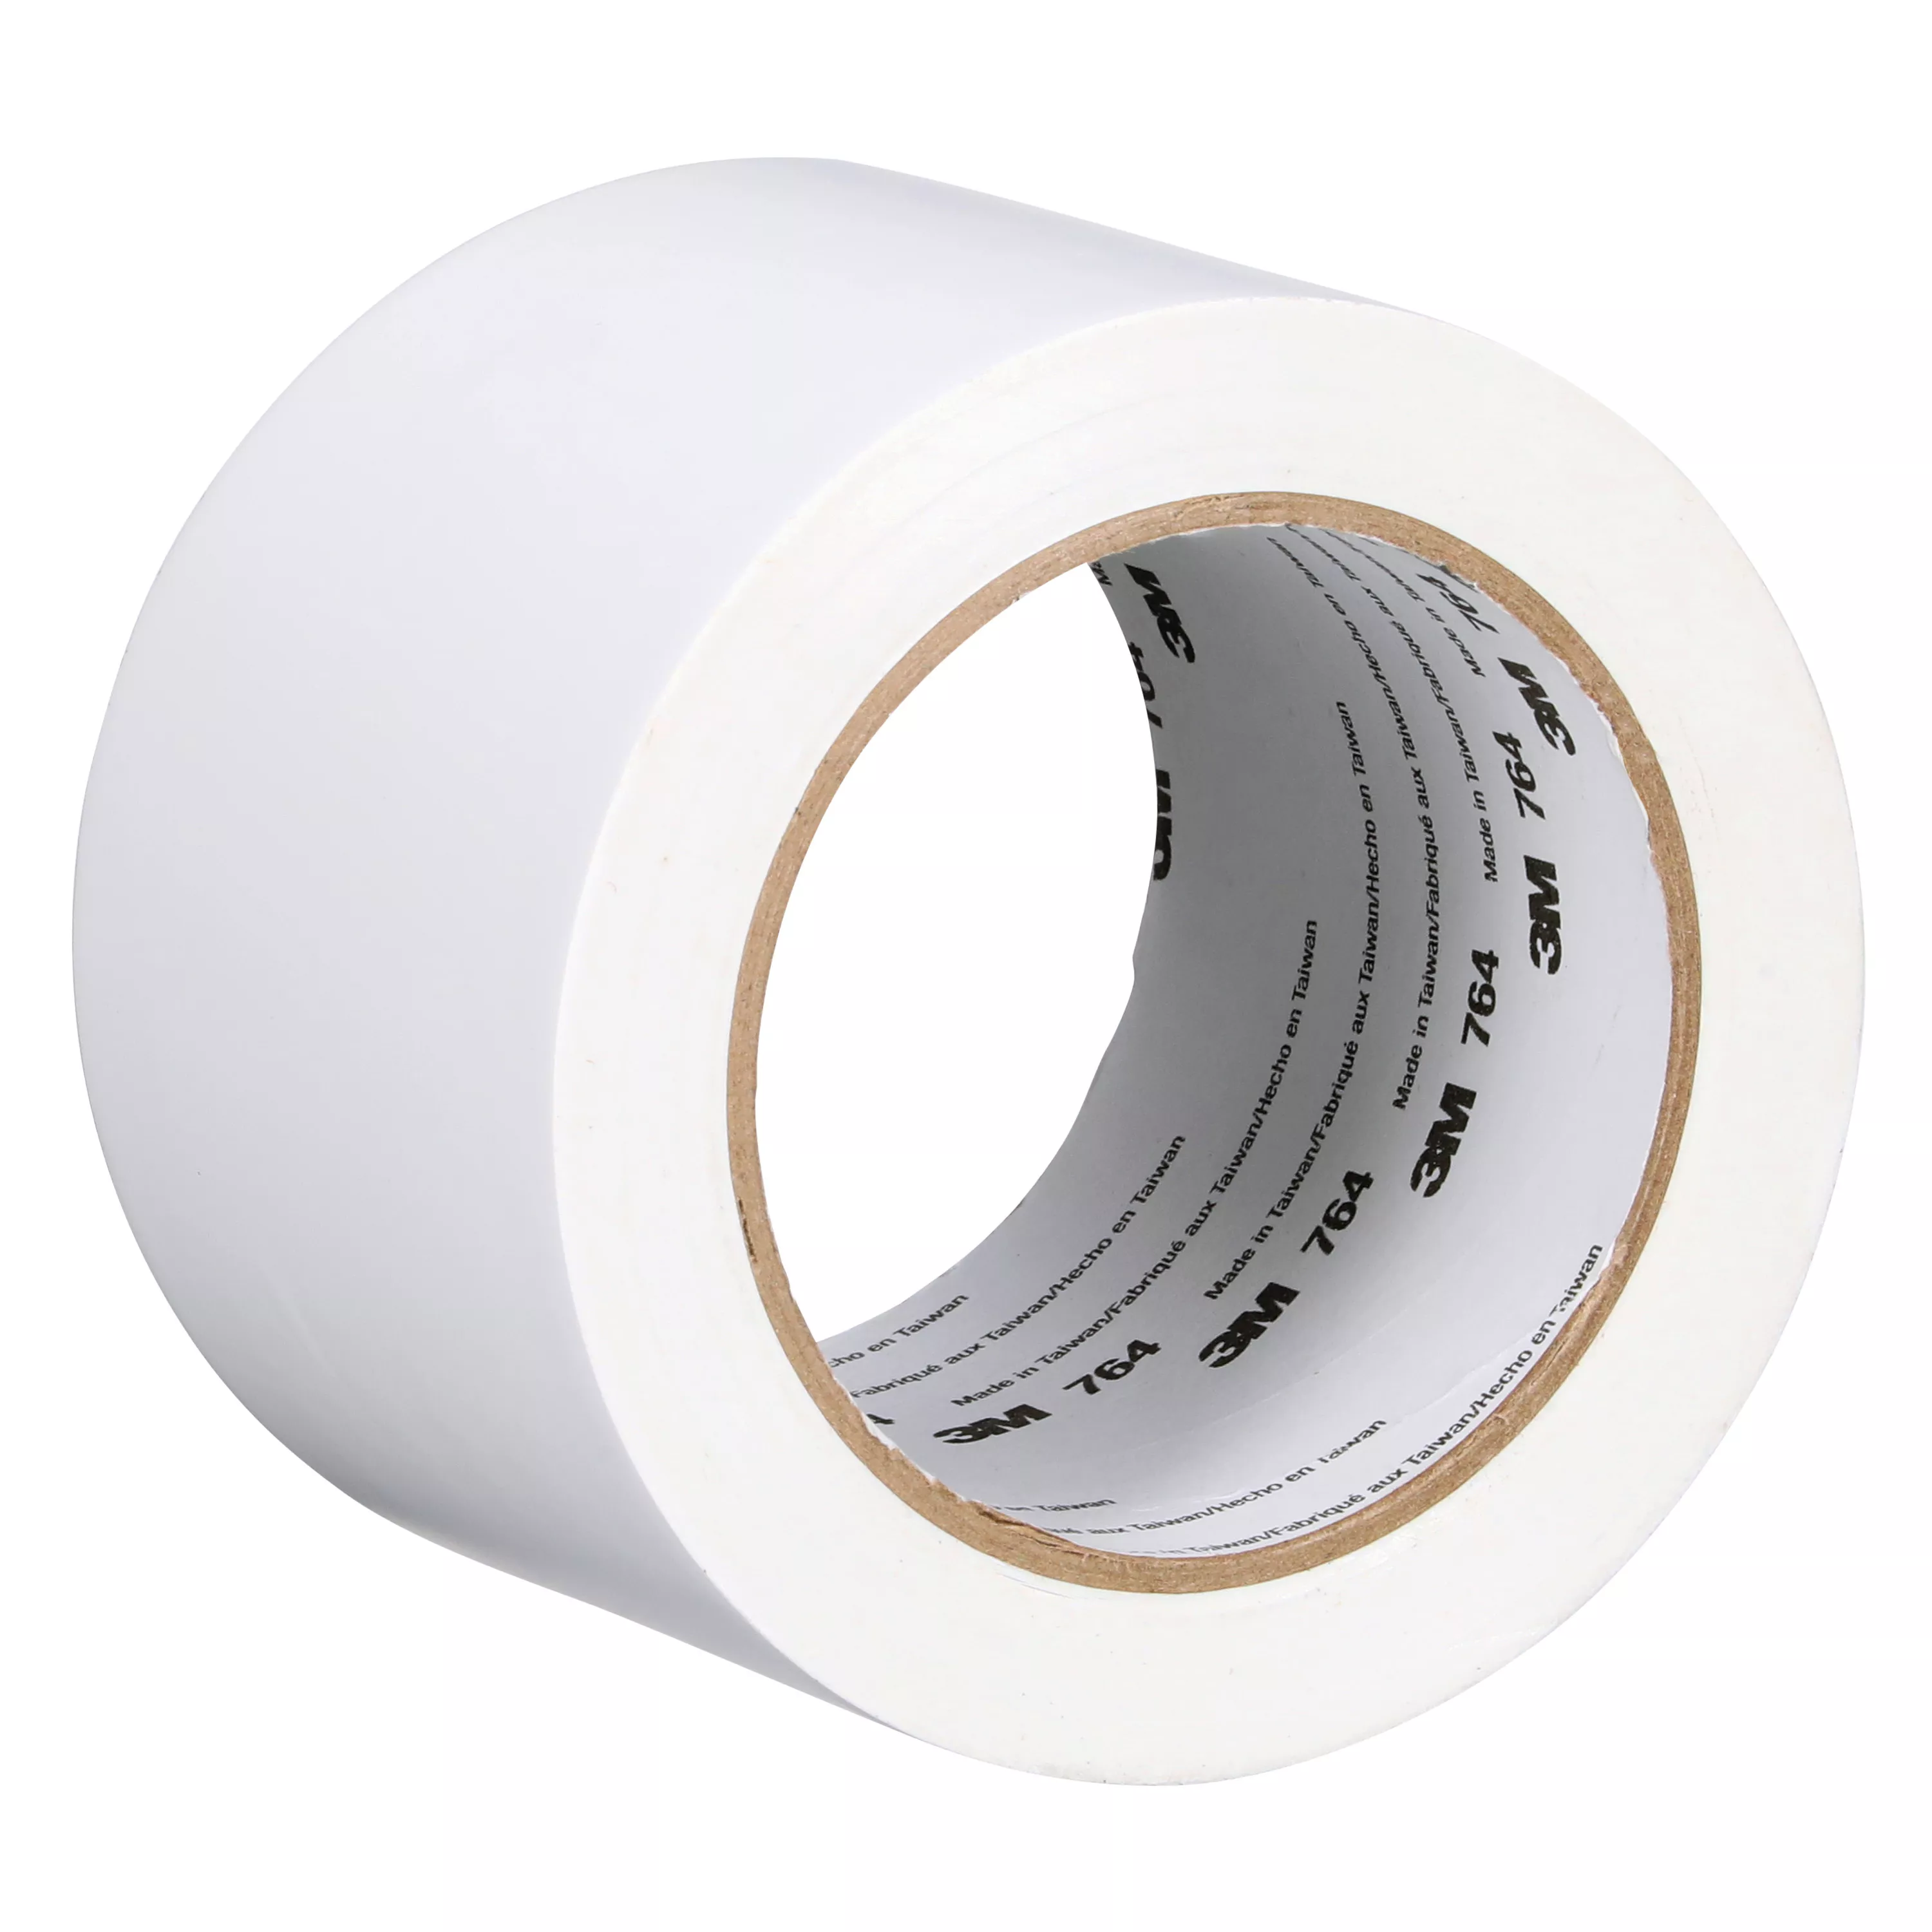 3M™ General Purpose Vinyl Tape 764, White, 2 in x 36 yd, 5 mil, 24 Roll/Case, Individually Wrapped Conveniently Packaged